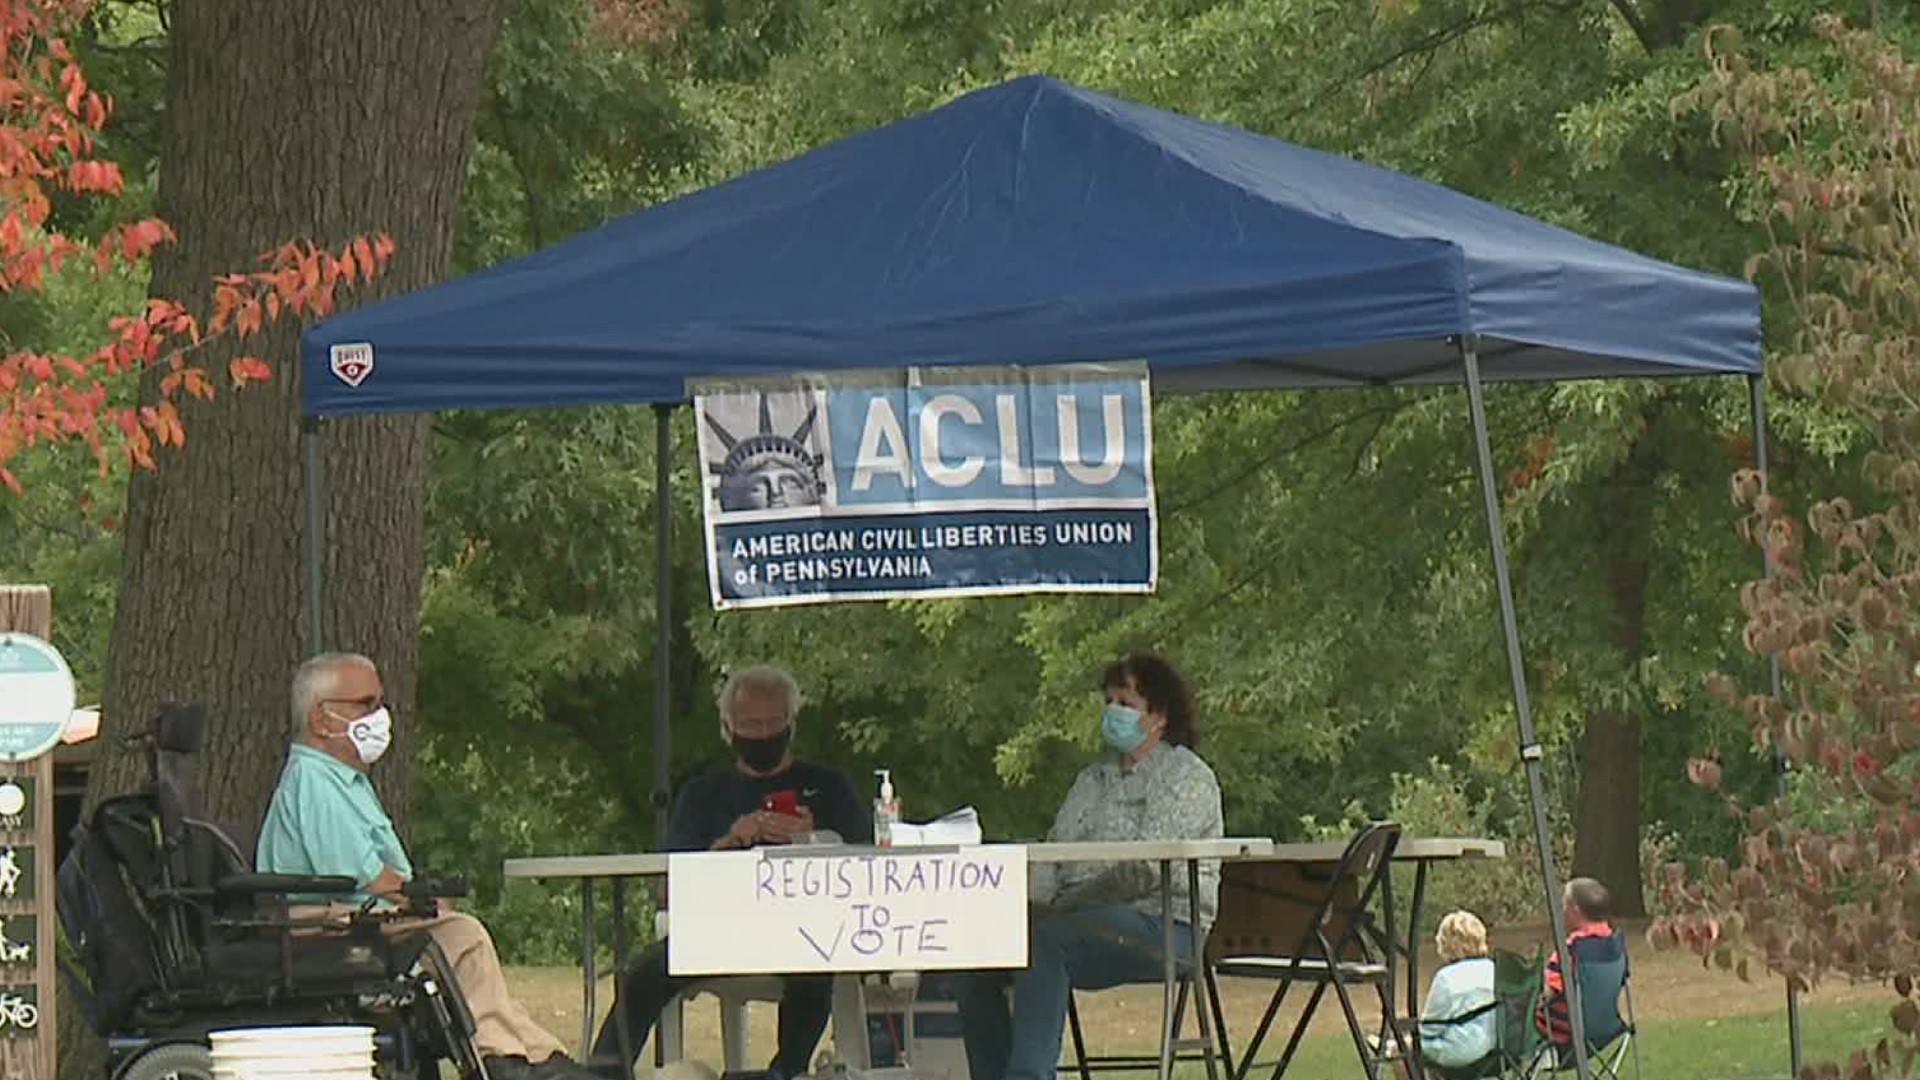 The NEPA Chapter of the American Civil Liberties Union hosted a voter rights event at Nay Aug Park Sunday.